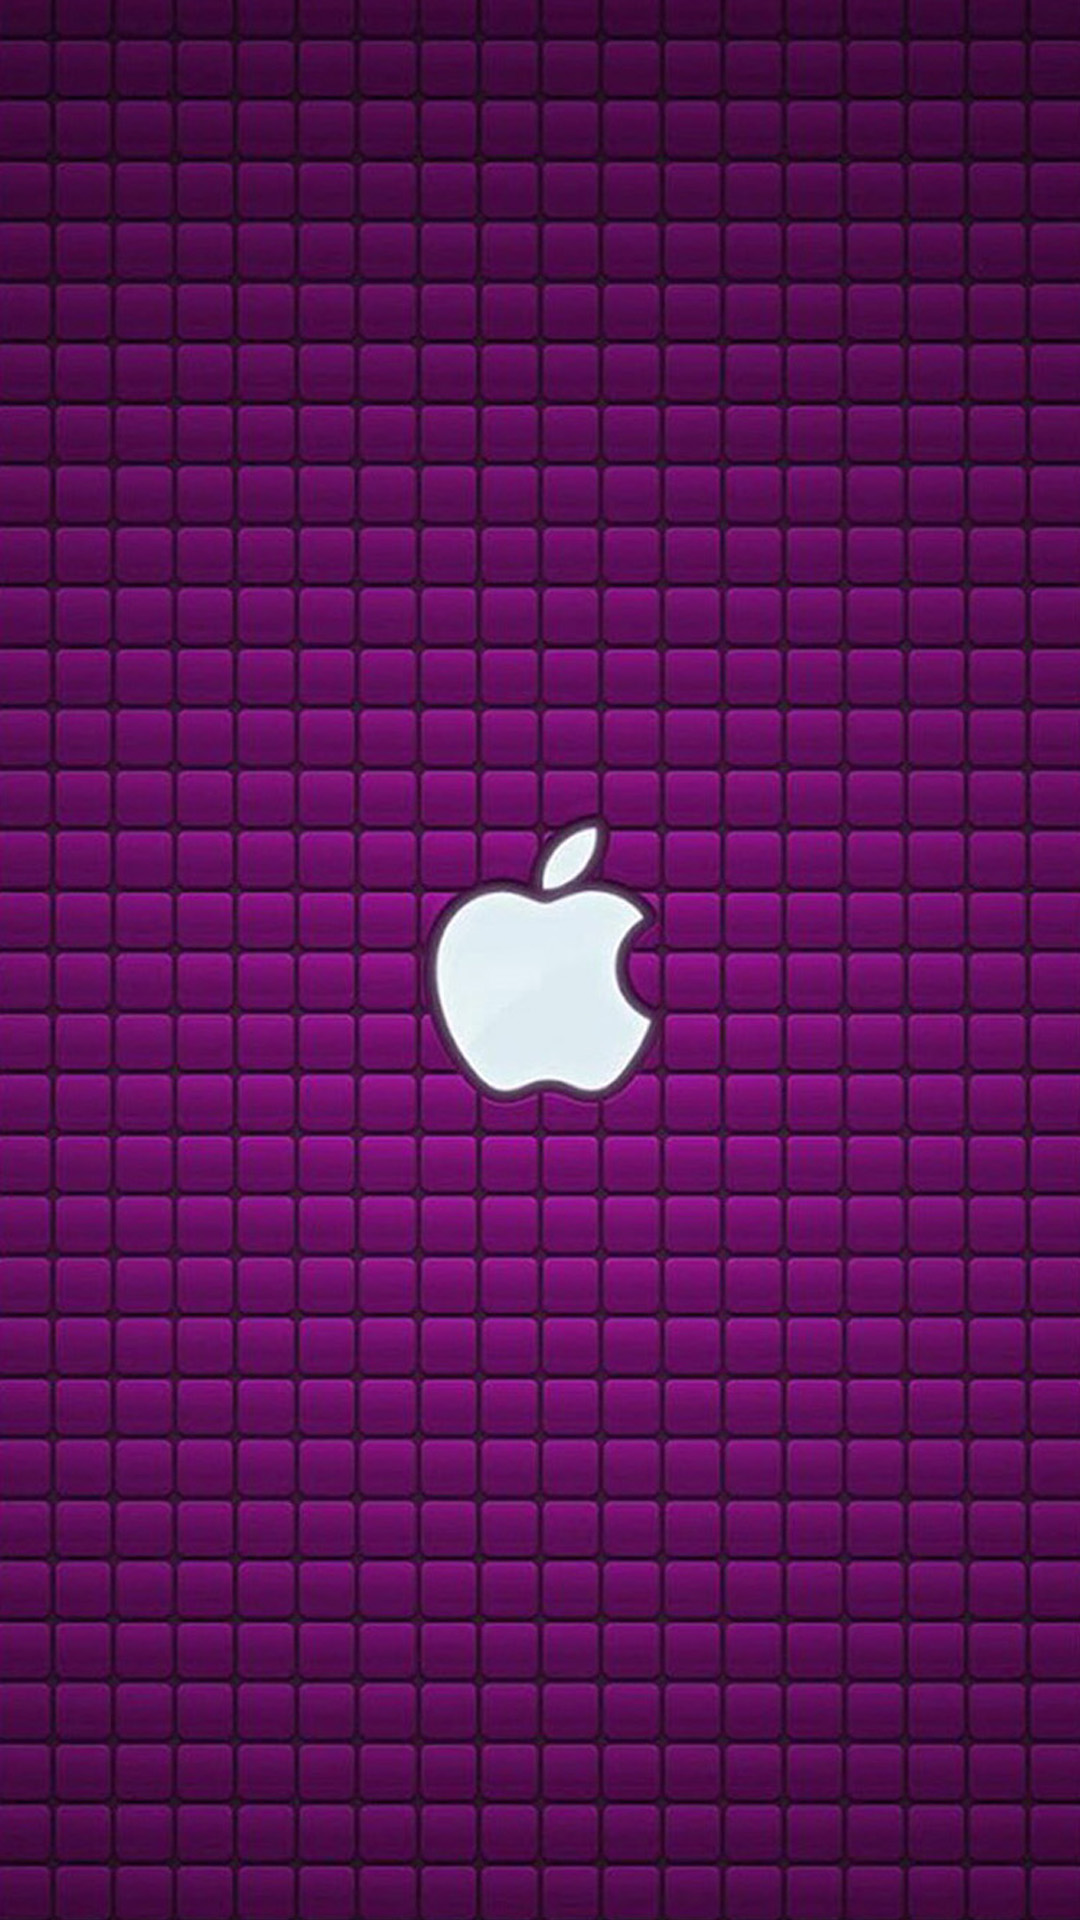 Apple Logo Background For iPhone